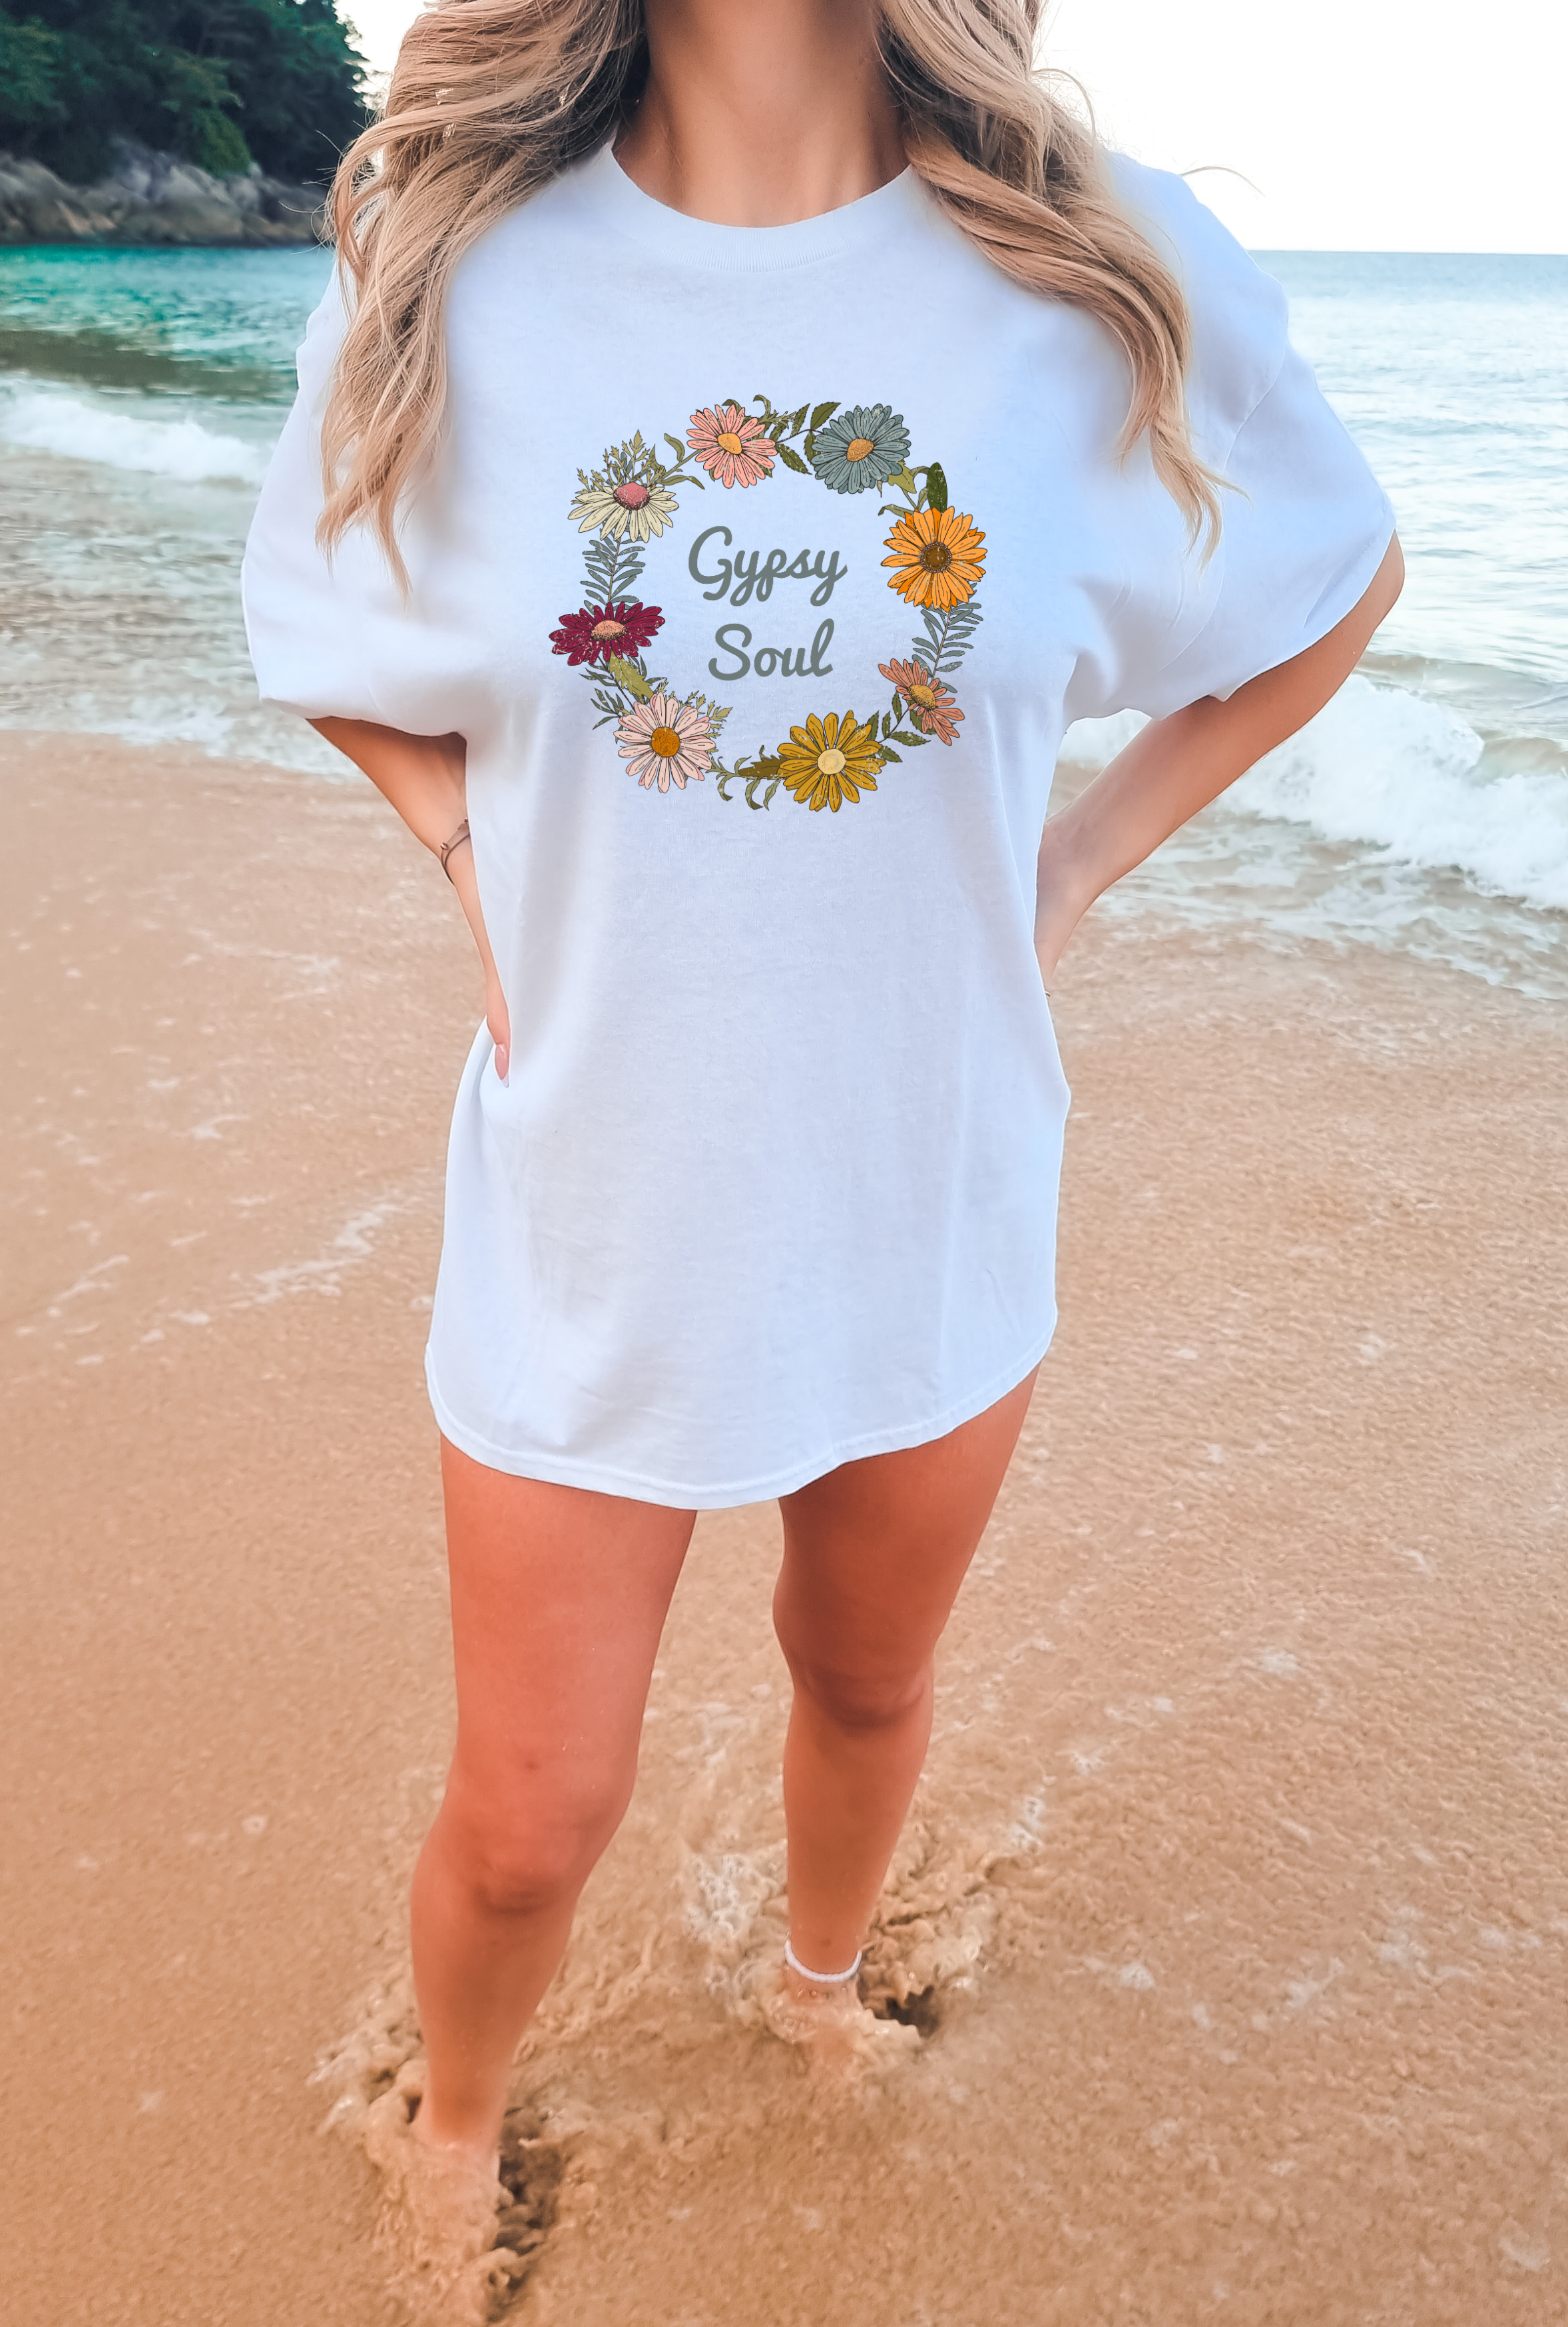 Gypsy Soul Wildflowers Oversize Retro Style Graphic T-Shirt